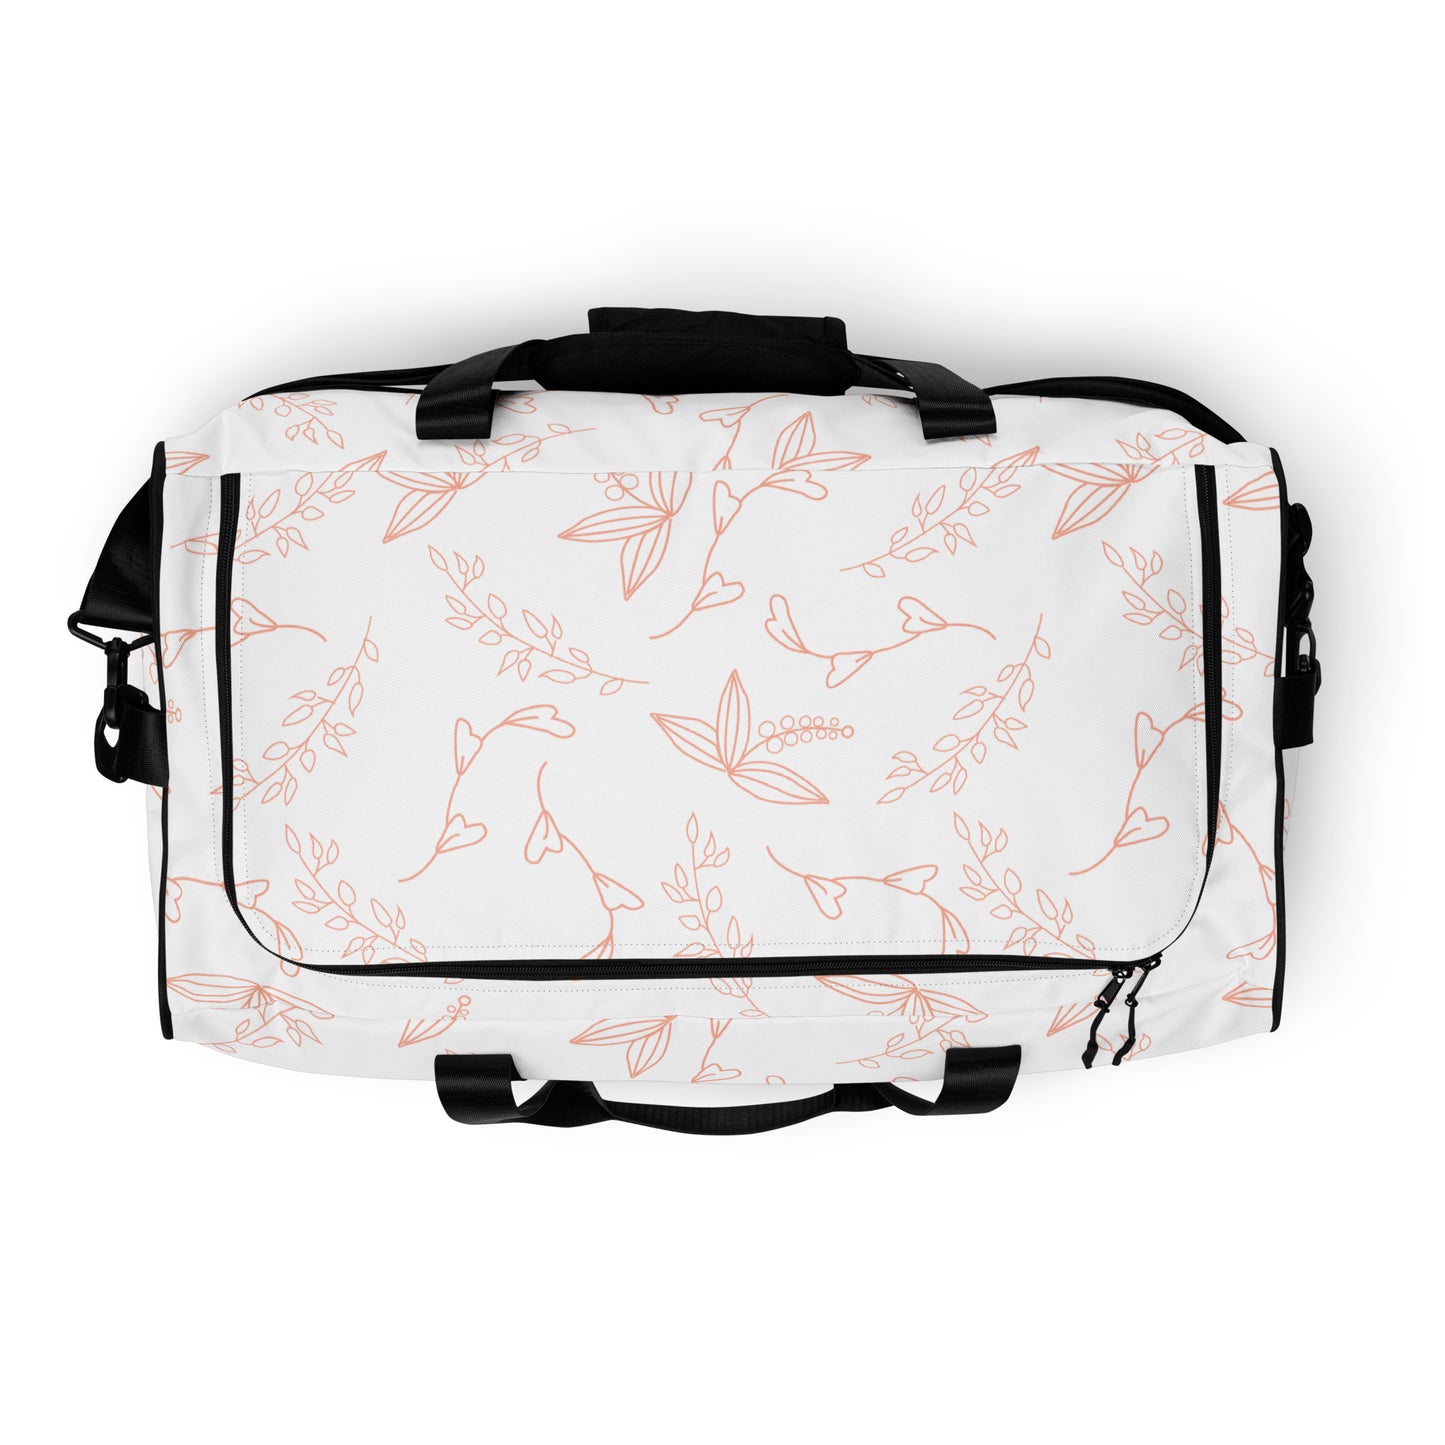 White Floral - Sustainably Made Duffle Bag